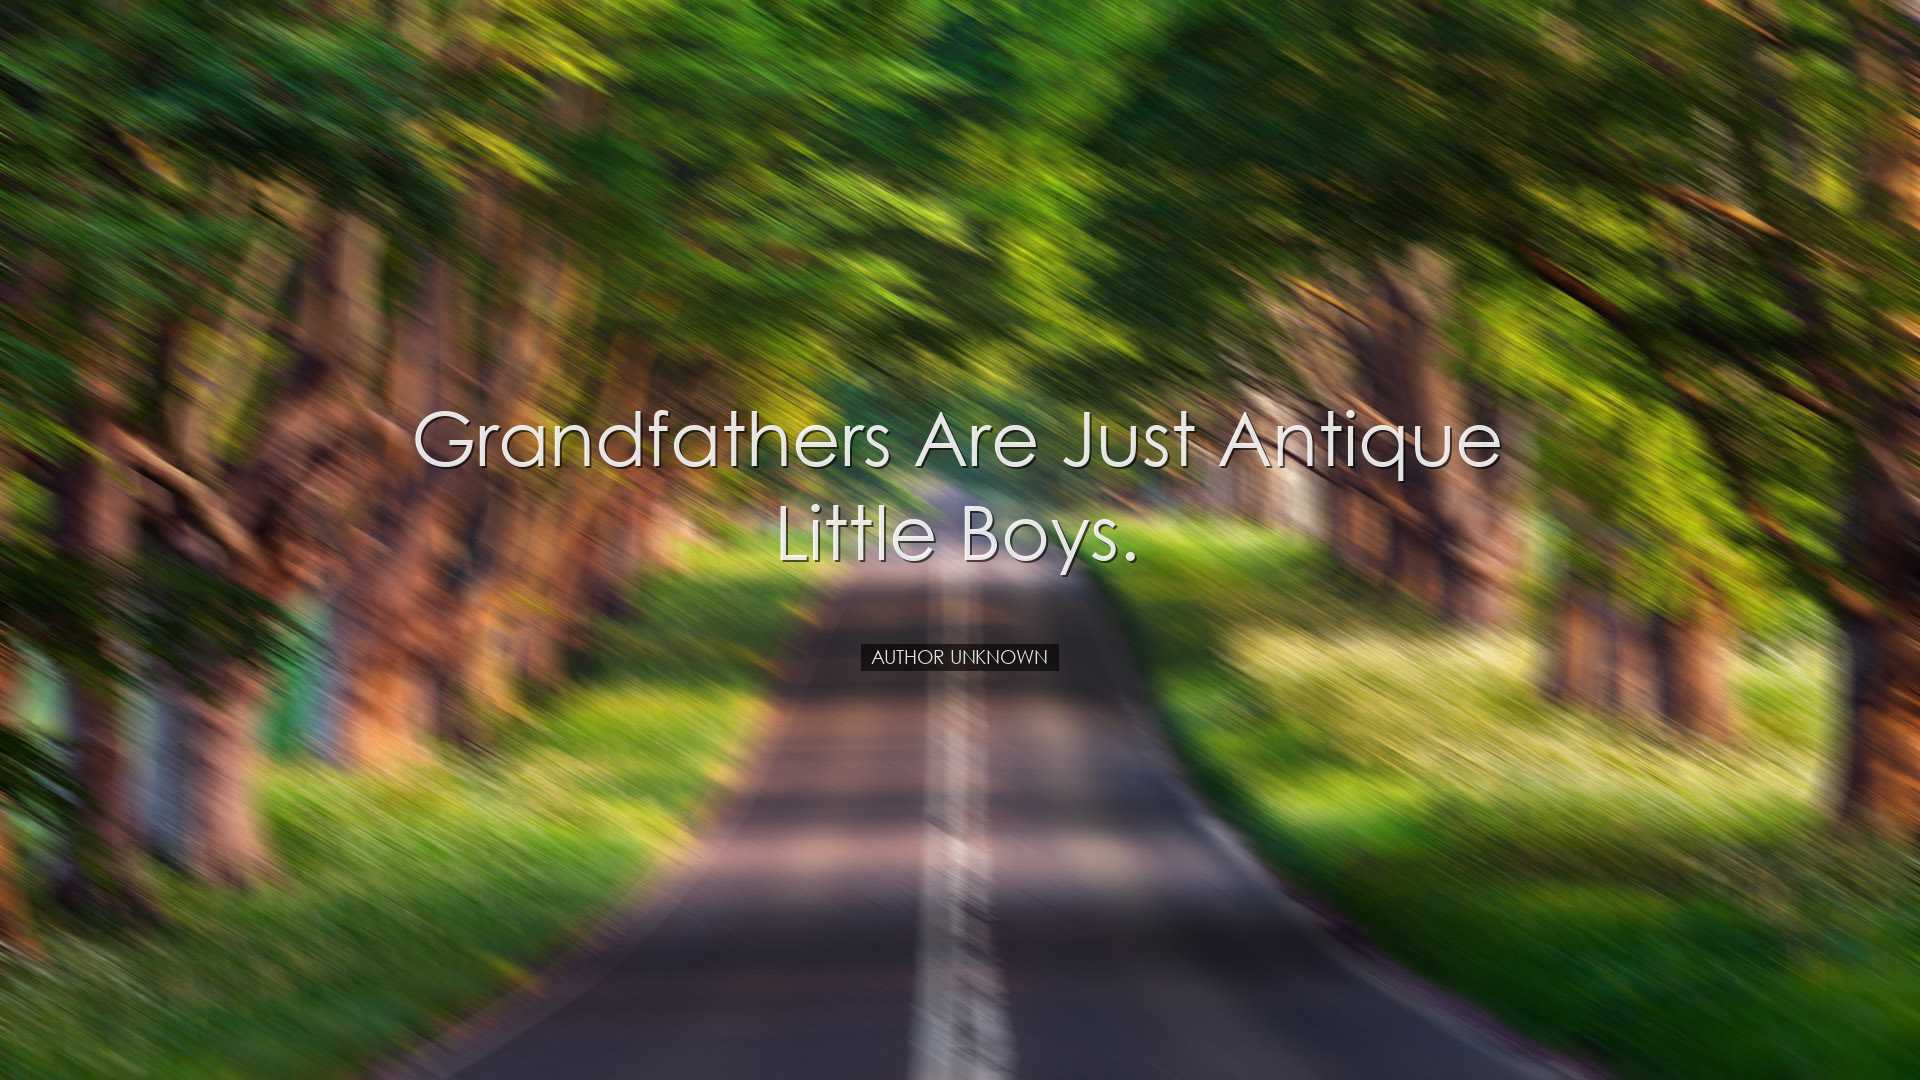 Grandfathers are just antique little boys. - Author Unknown